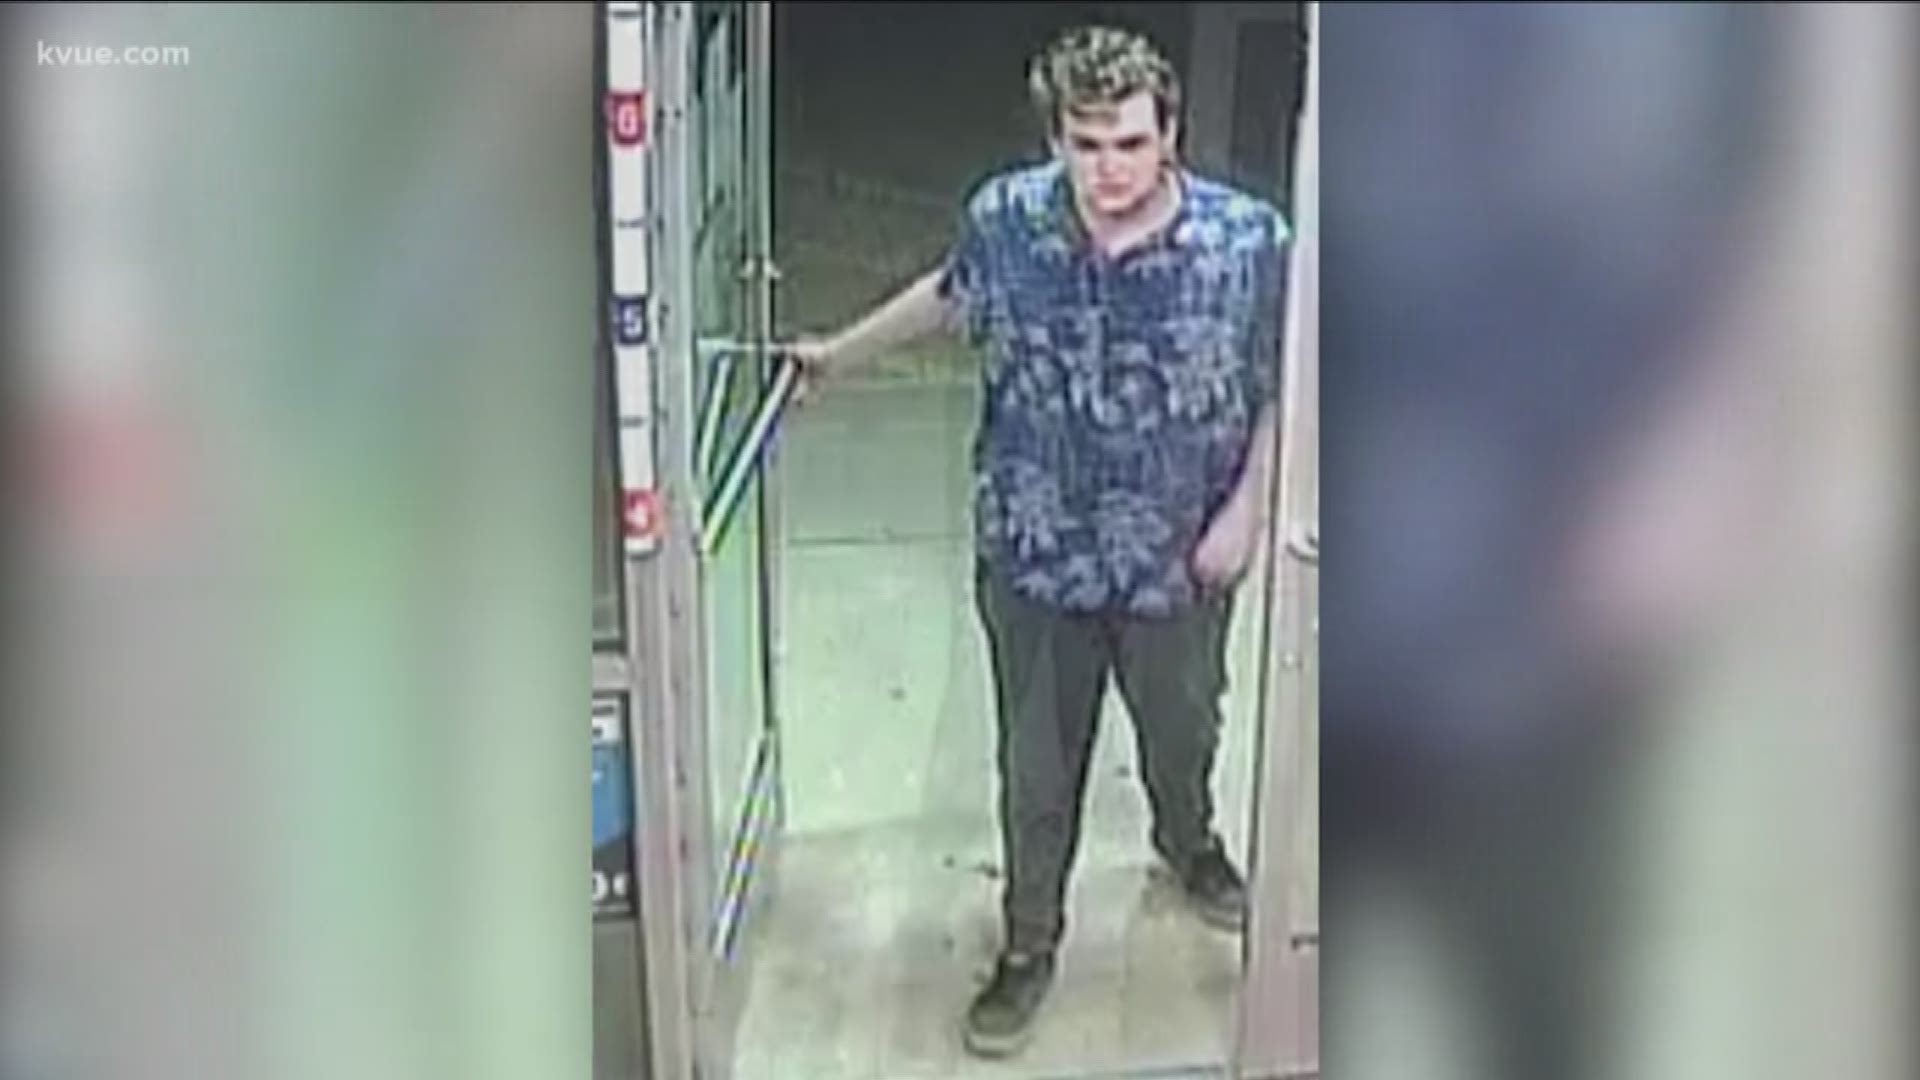 The HCSO is looking for a man accused of robbing a convenience store in Dripping Springs.